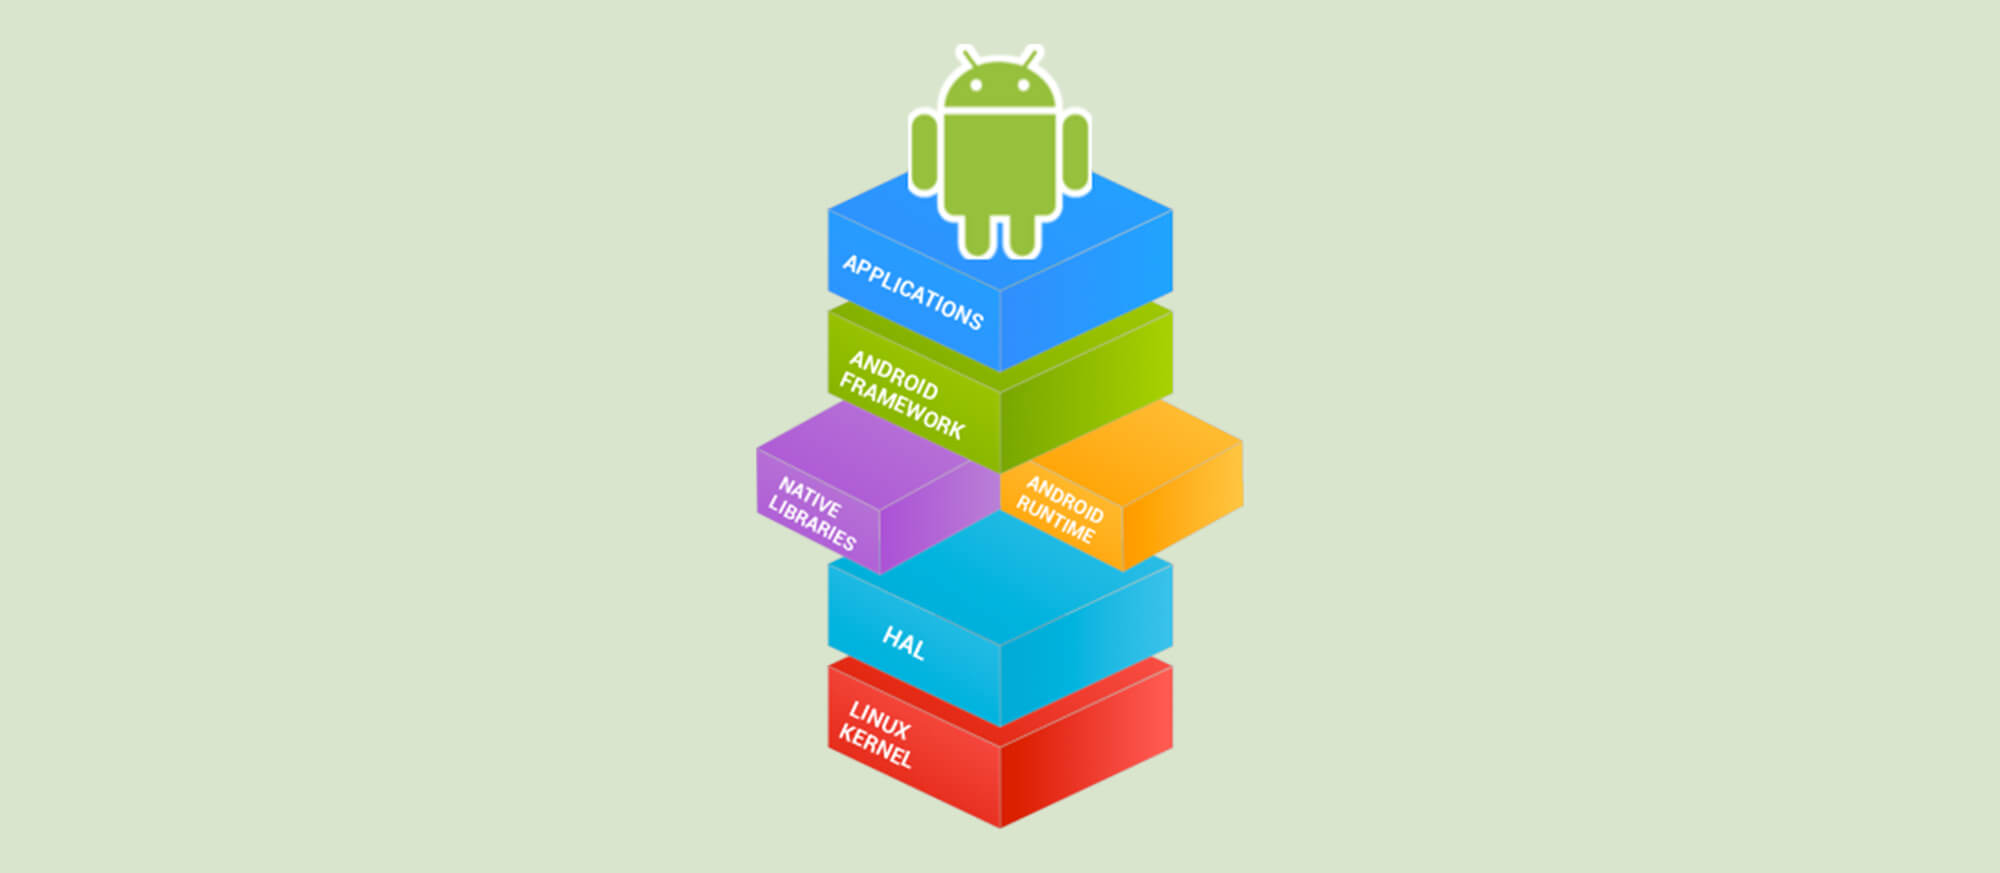 SunNet Solutions offers services for android mobile app development.